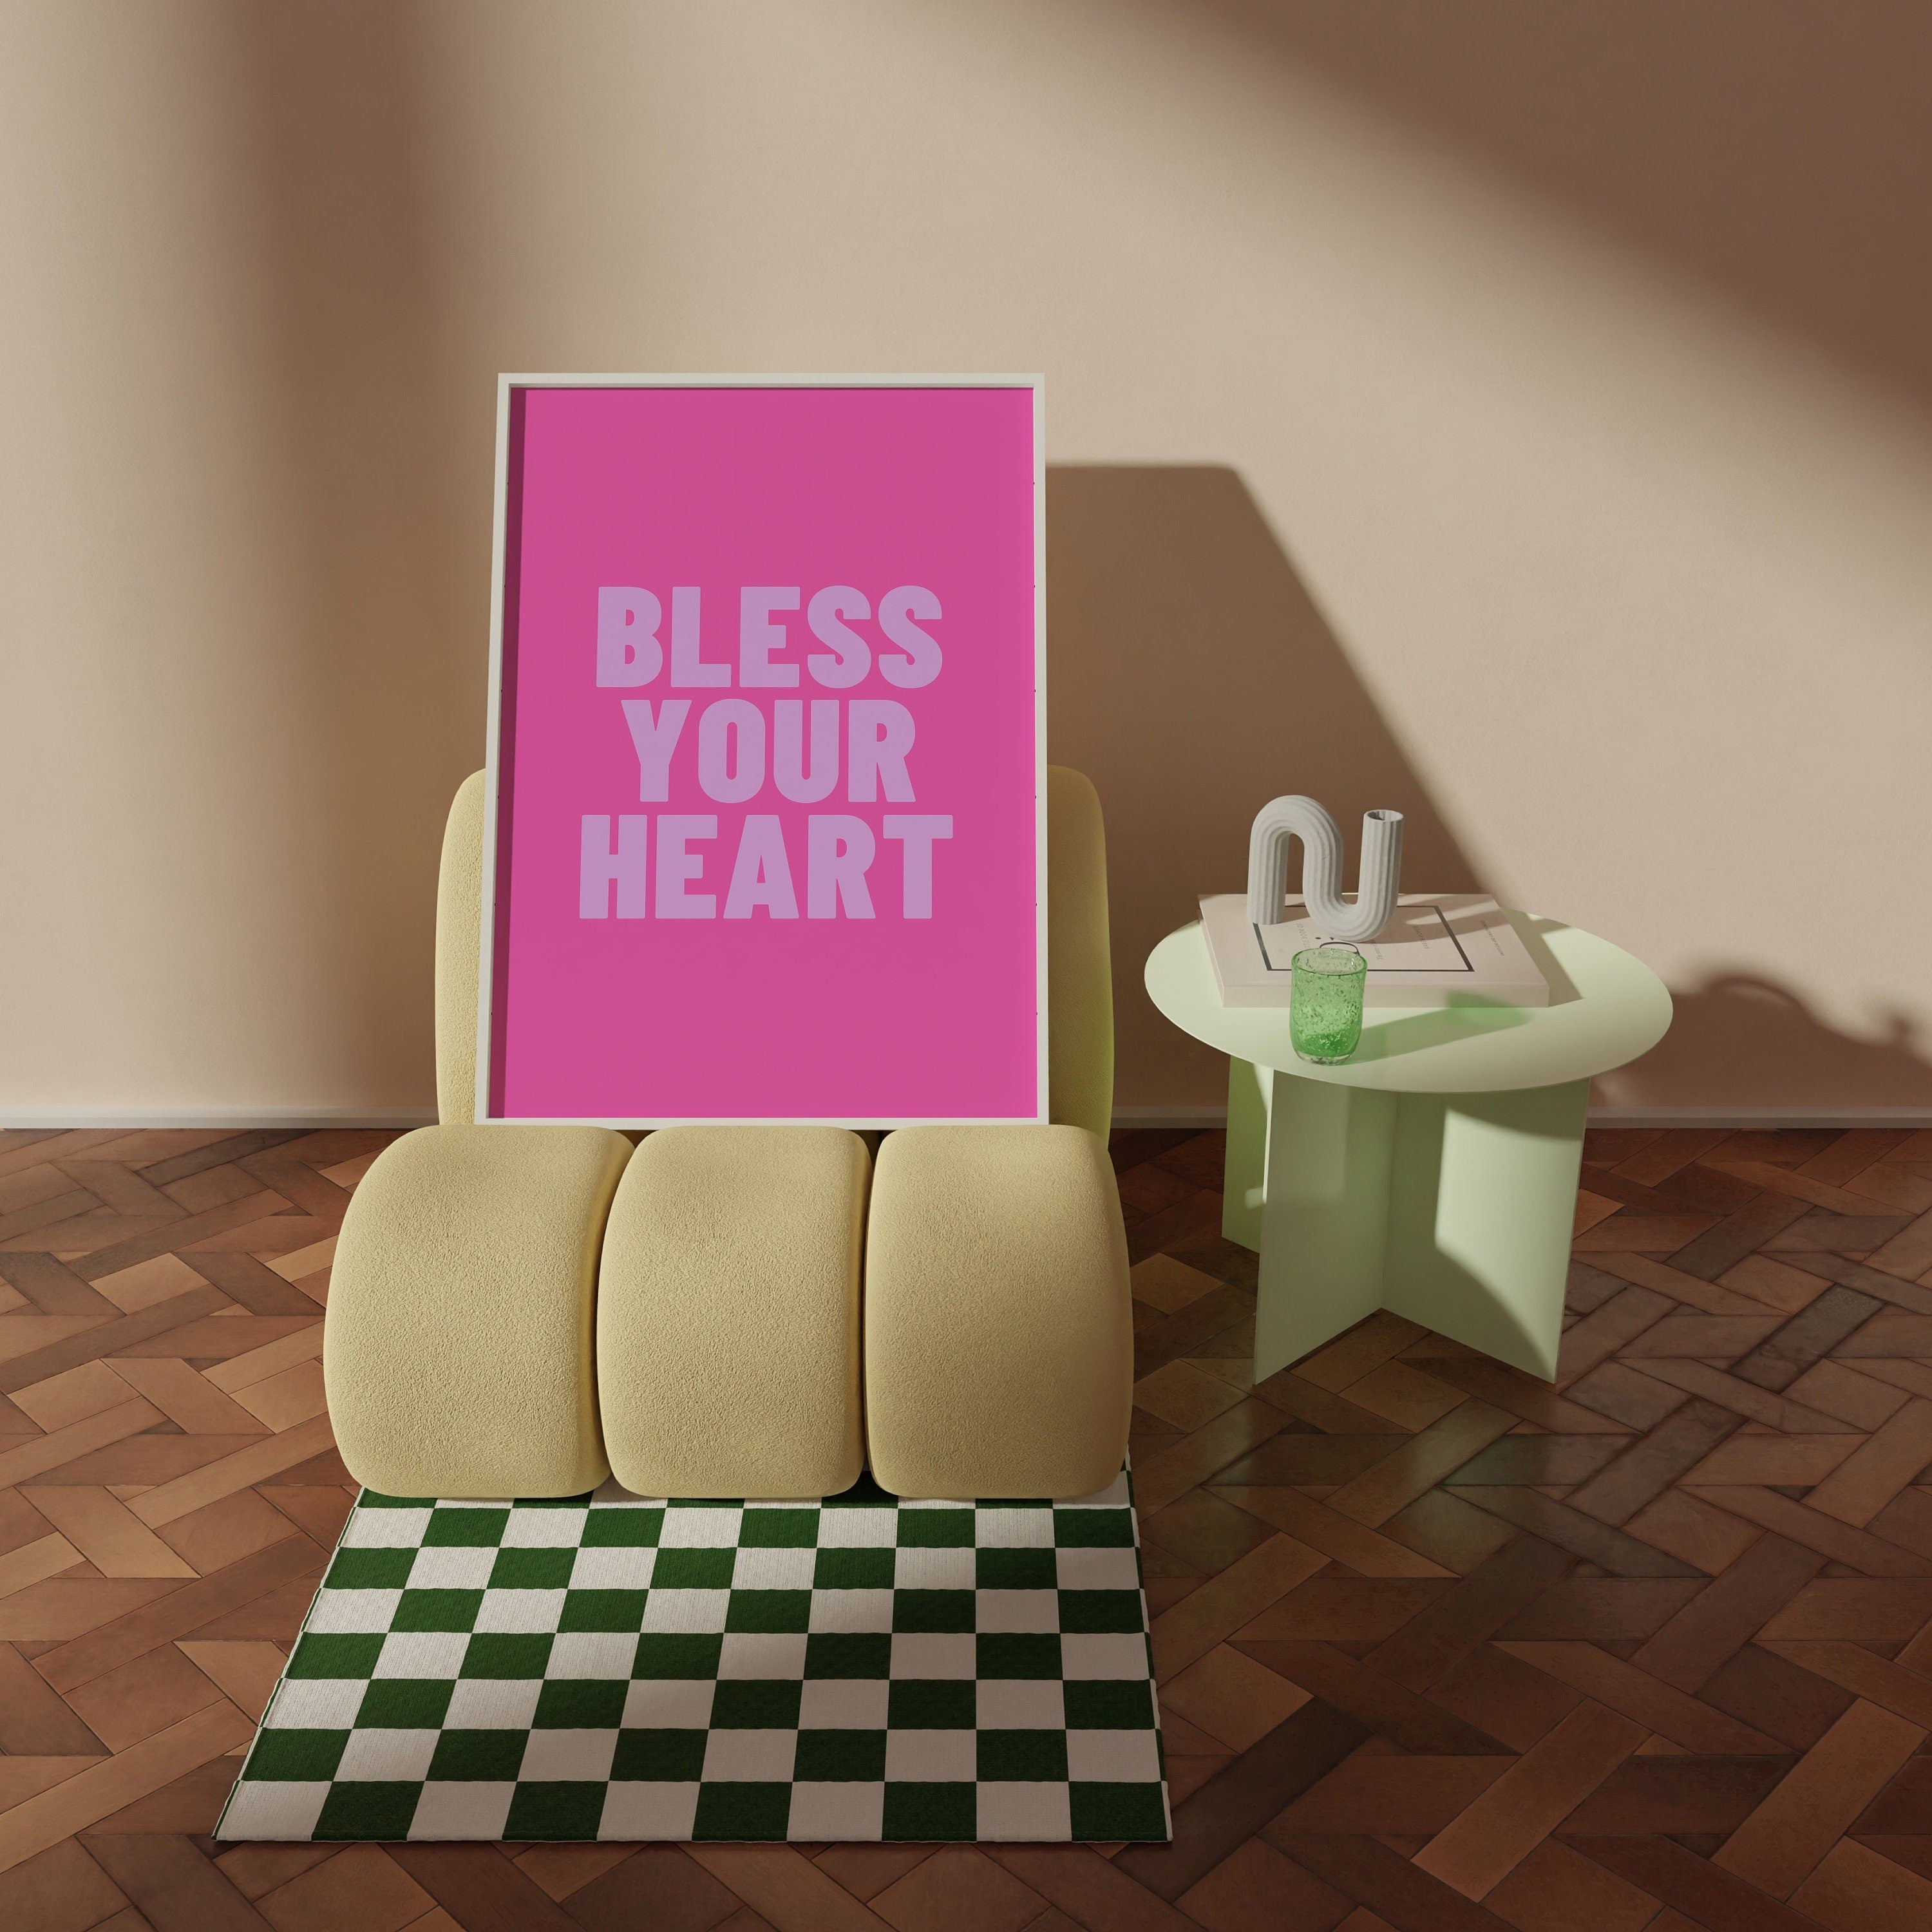 Charming Bless Your Heart Artwork